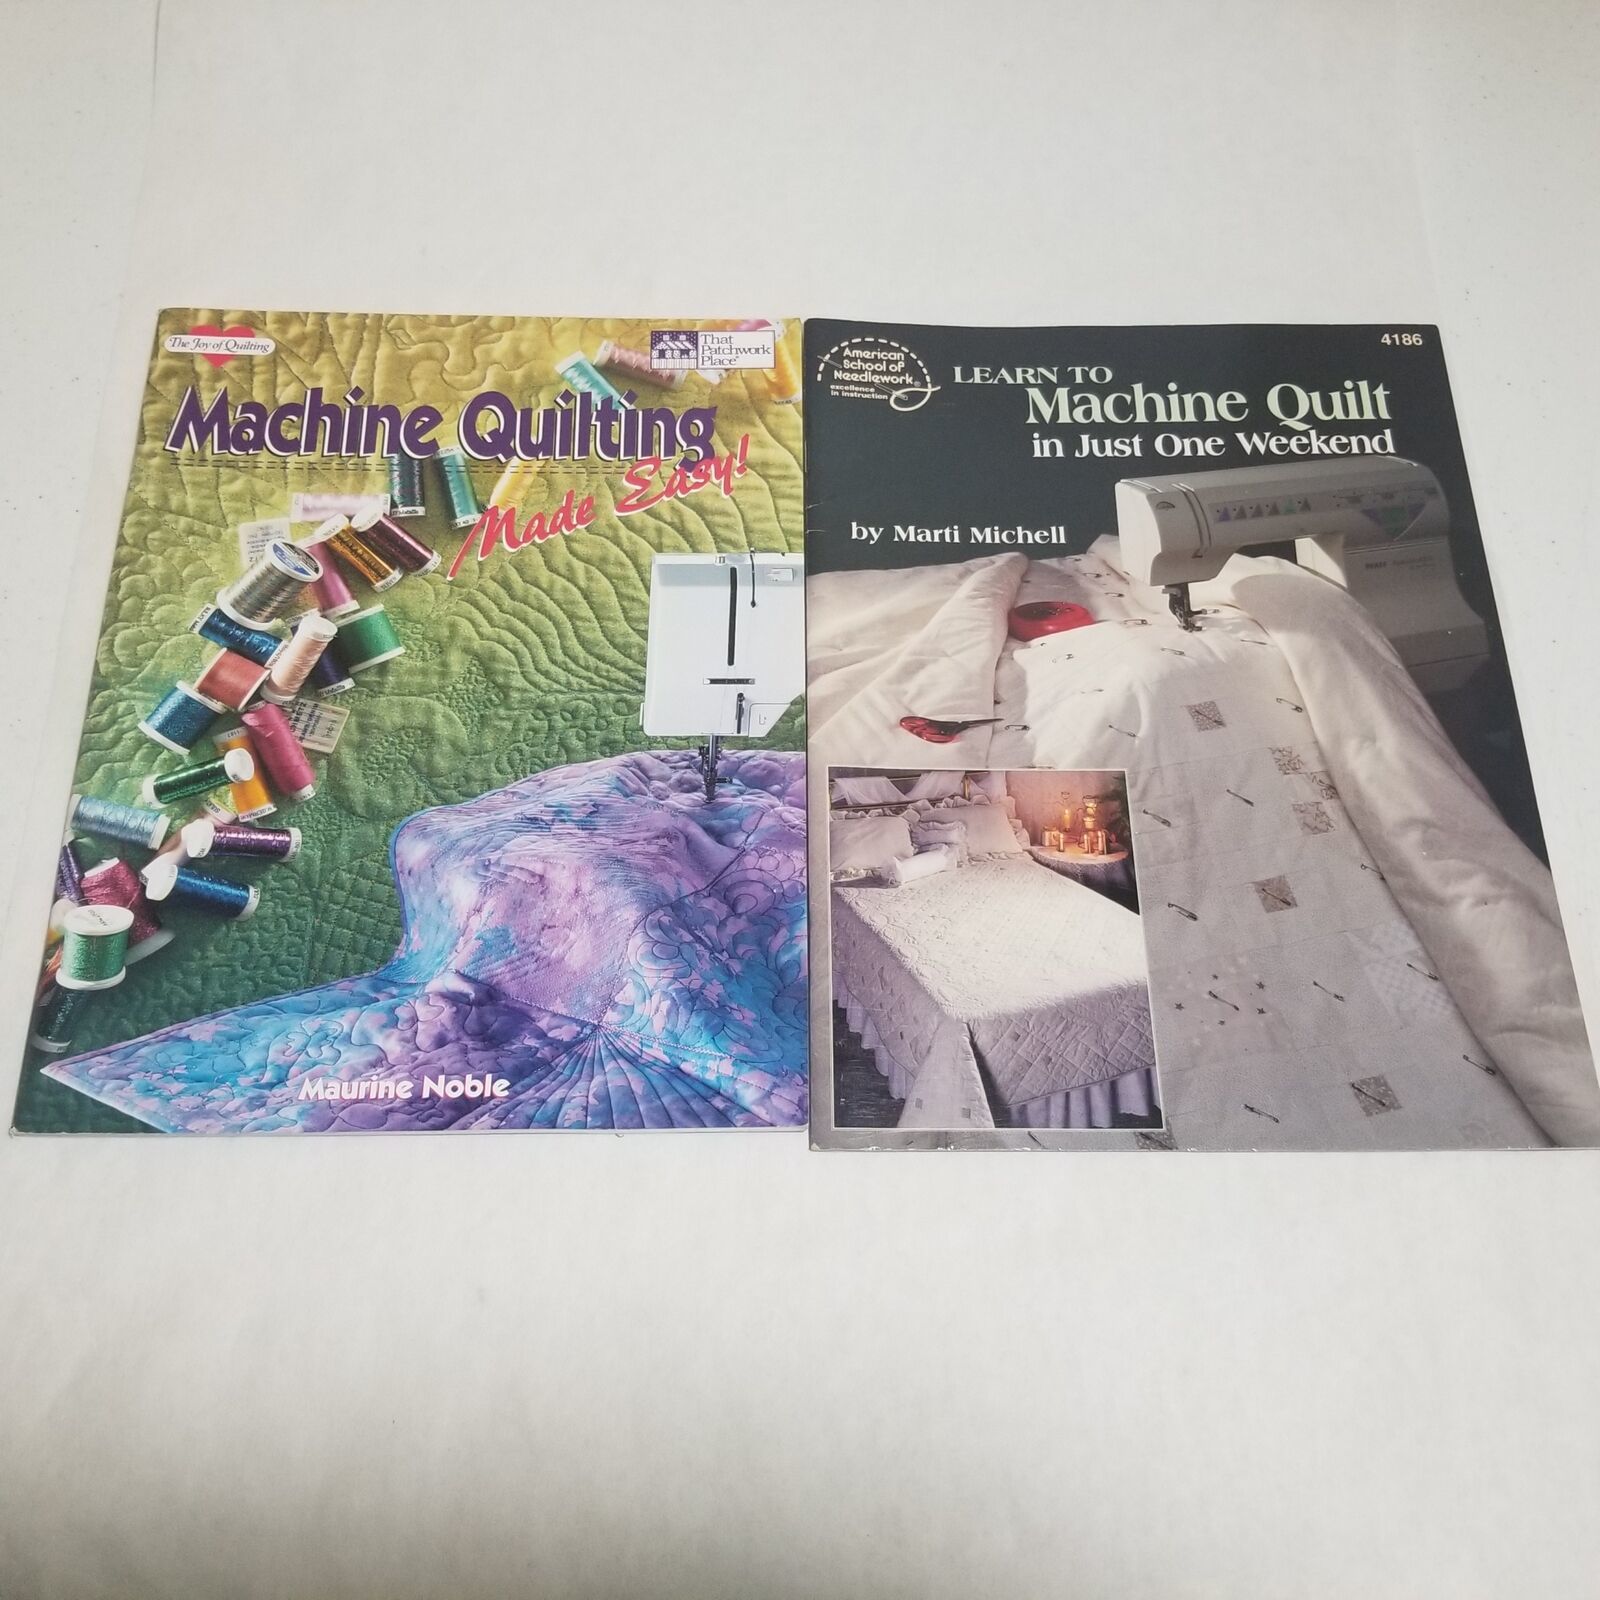 Primary image for Machine Quilting Lot of 2 Leaflets - Made Easy and Learn in One Weekend